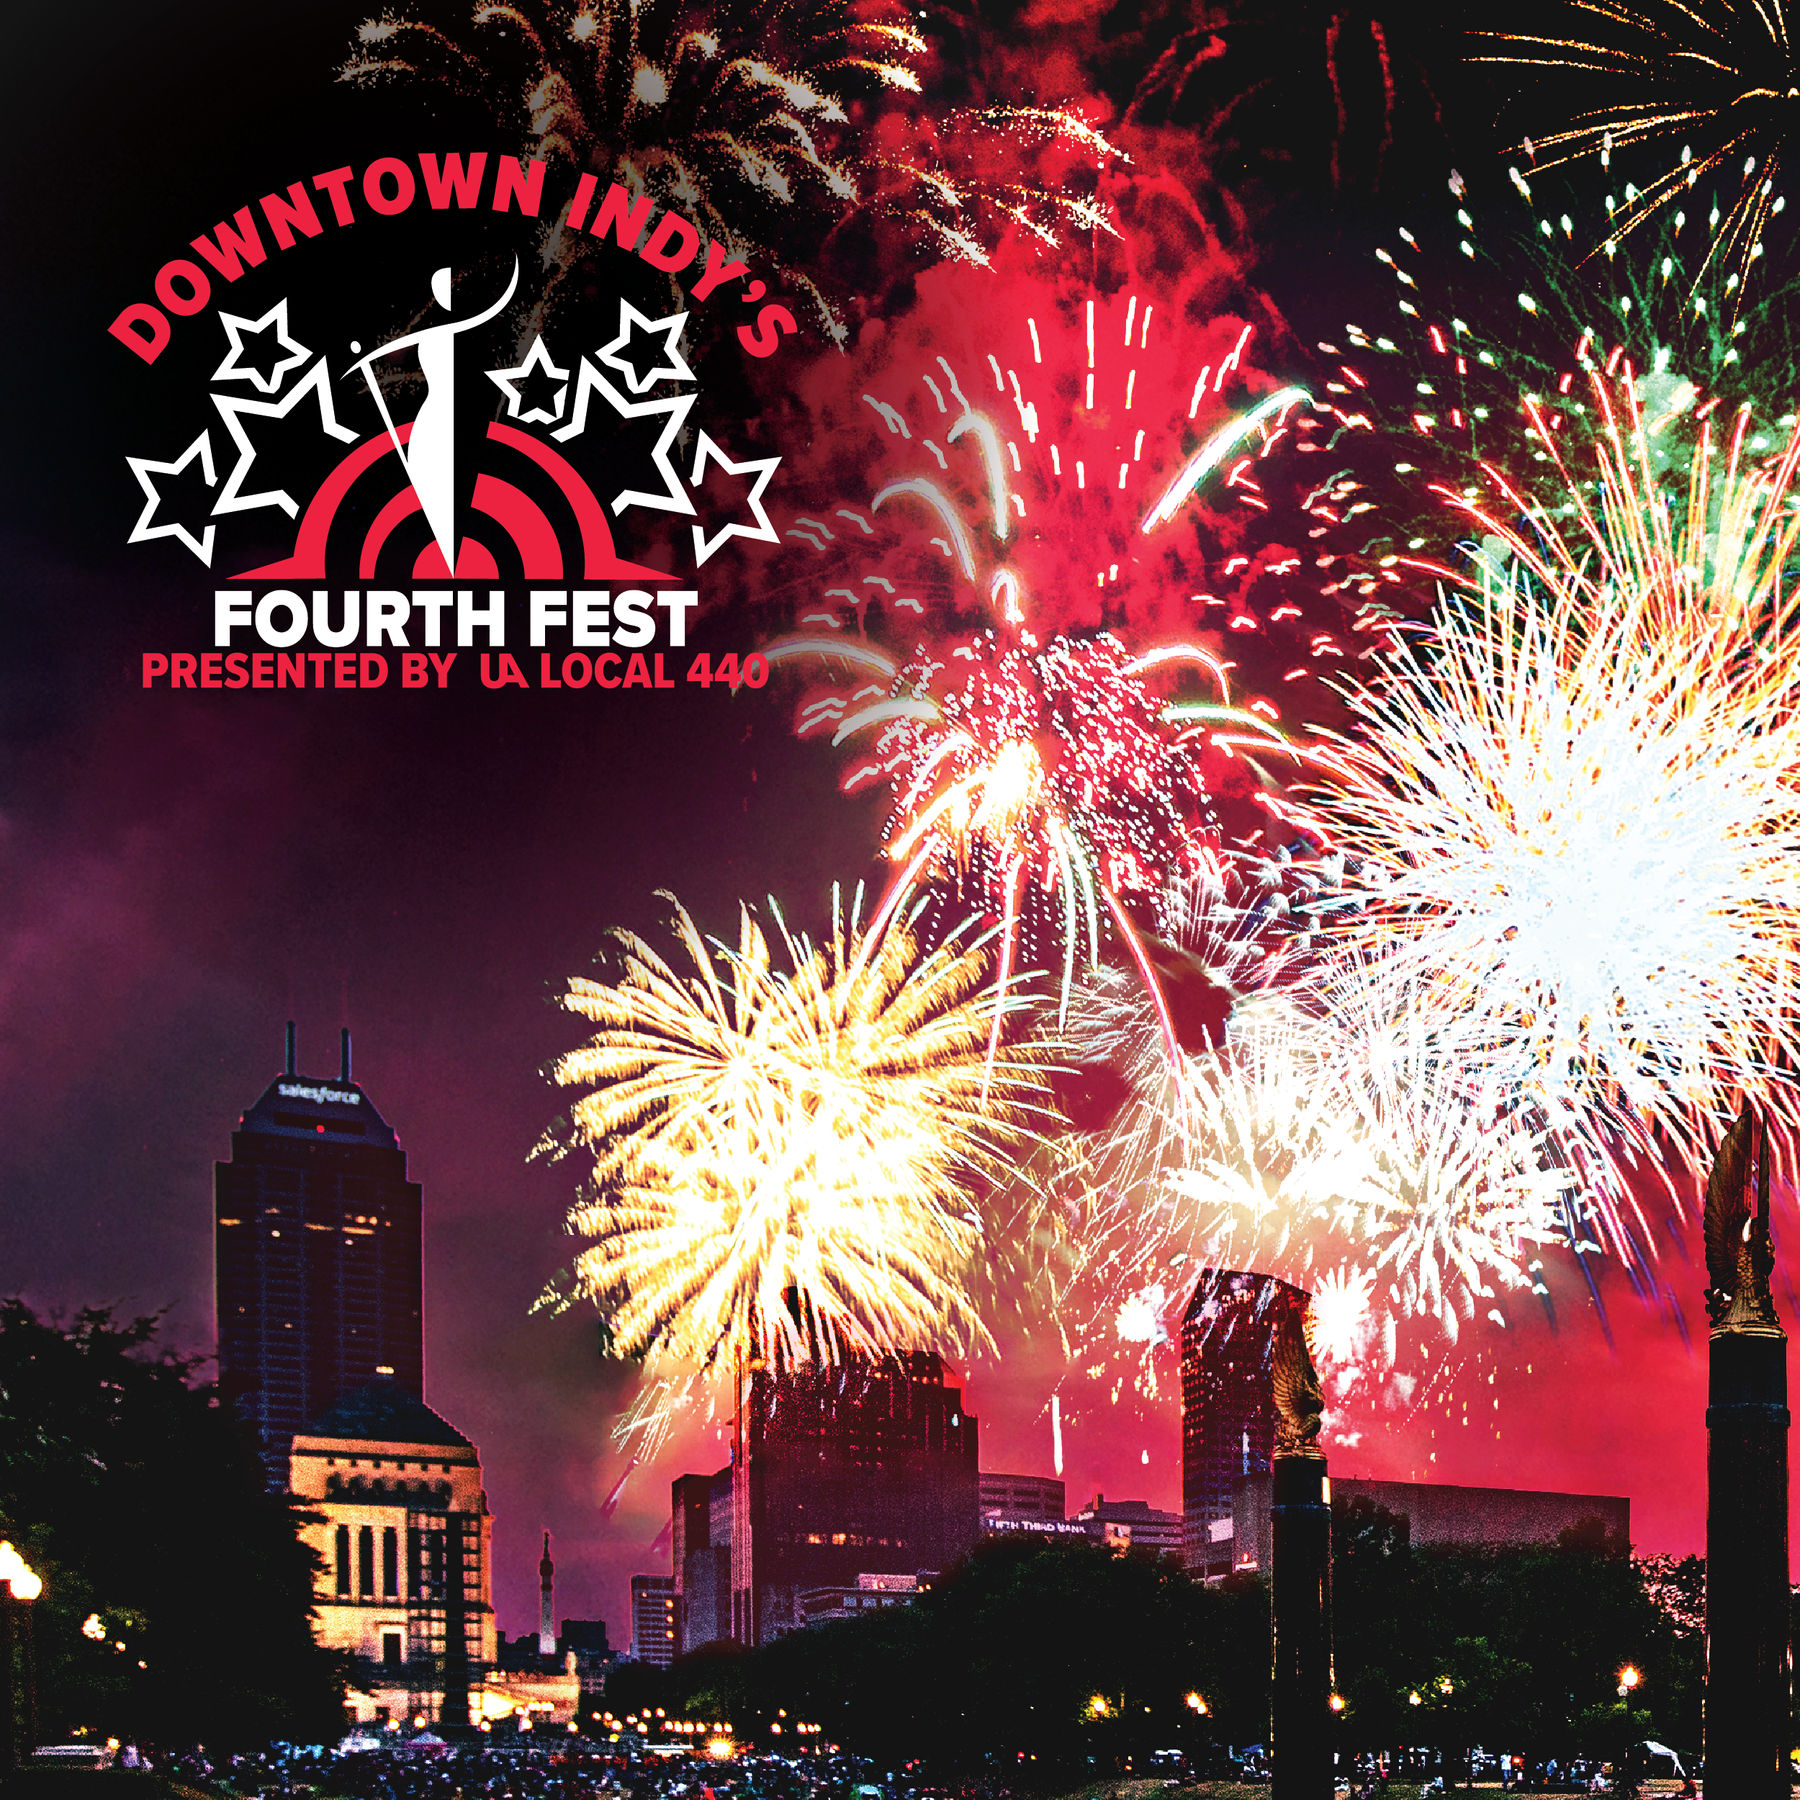 Downtown Indy Fourth Fest Presented By